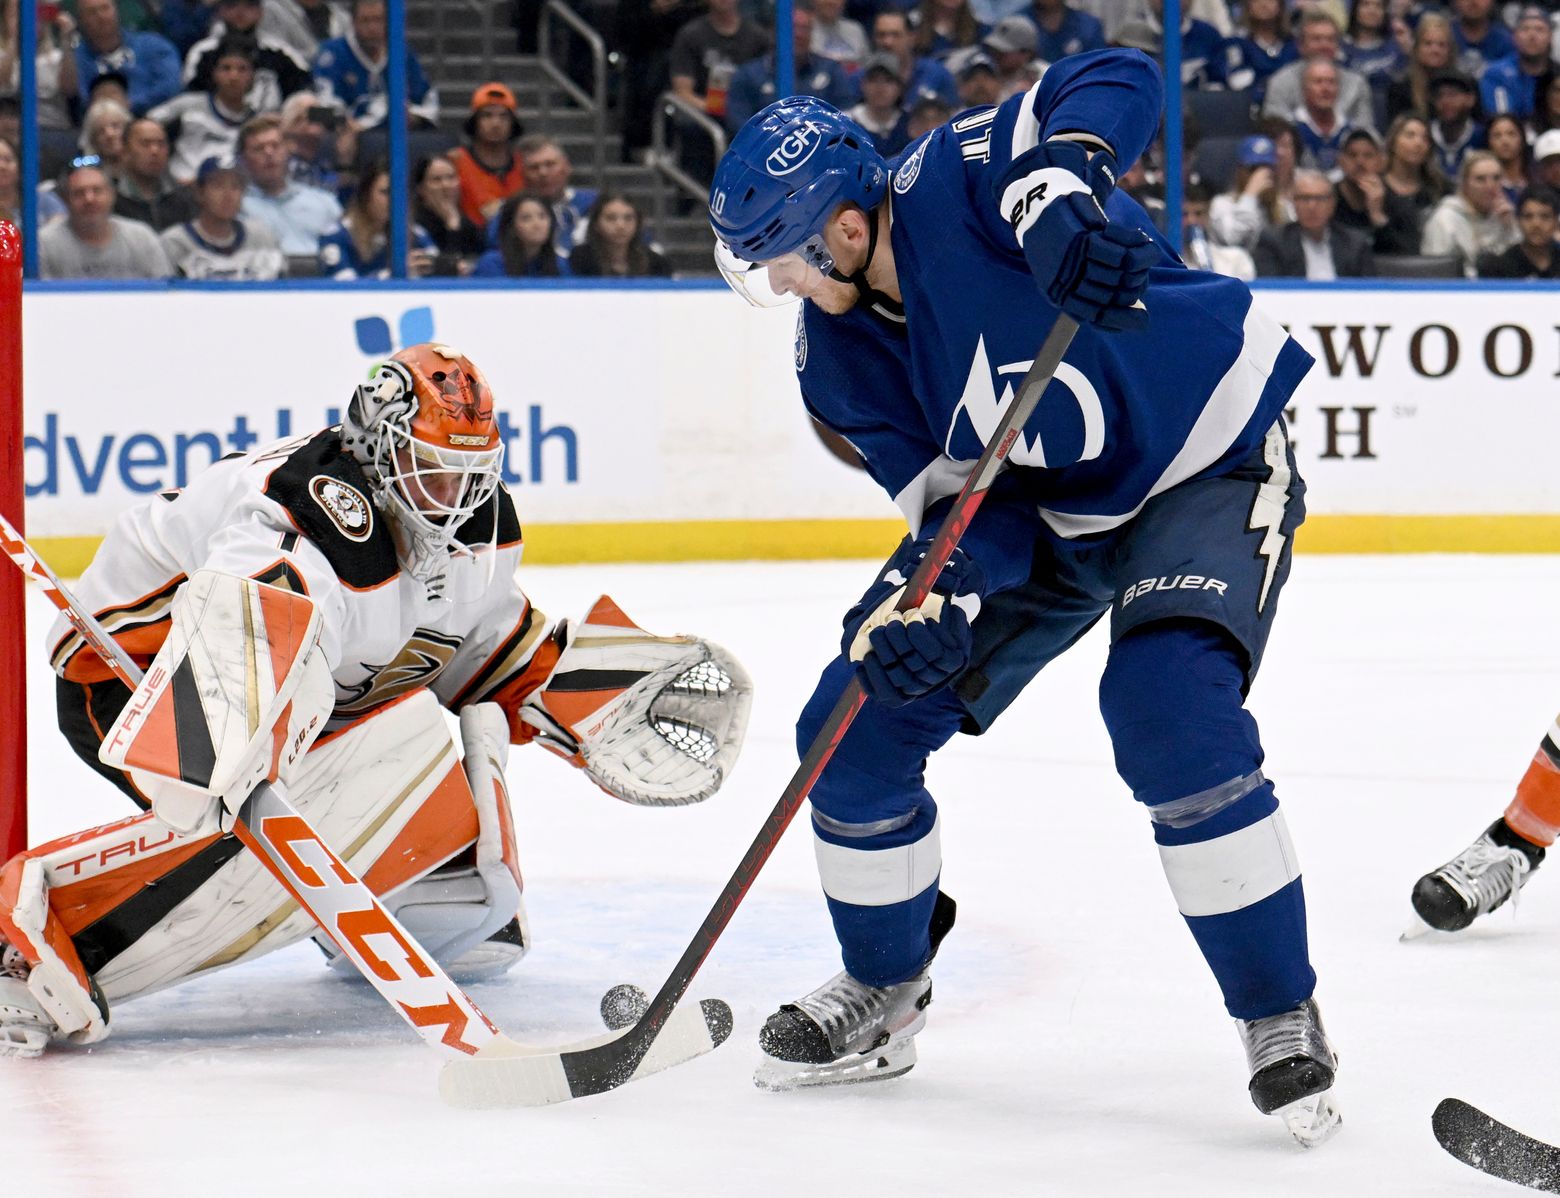 Lightning score 4 in 2nd period; Ducks lose 6th straight | The Seattle Times